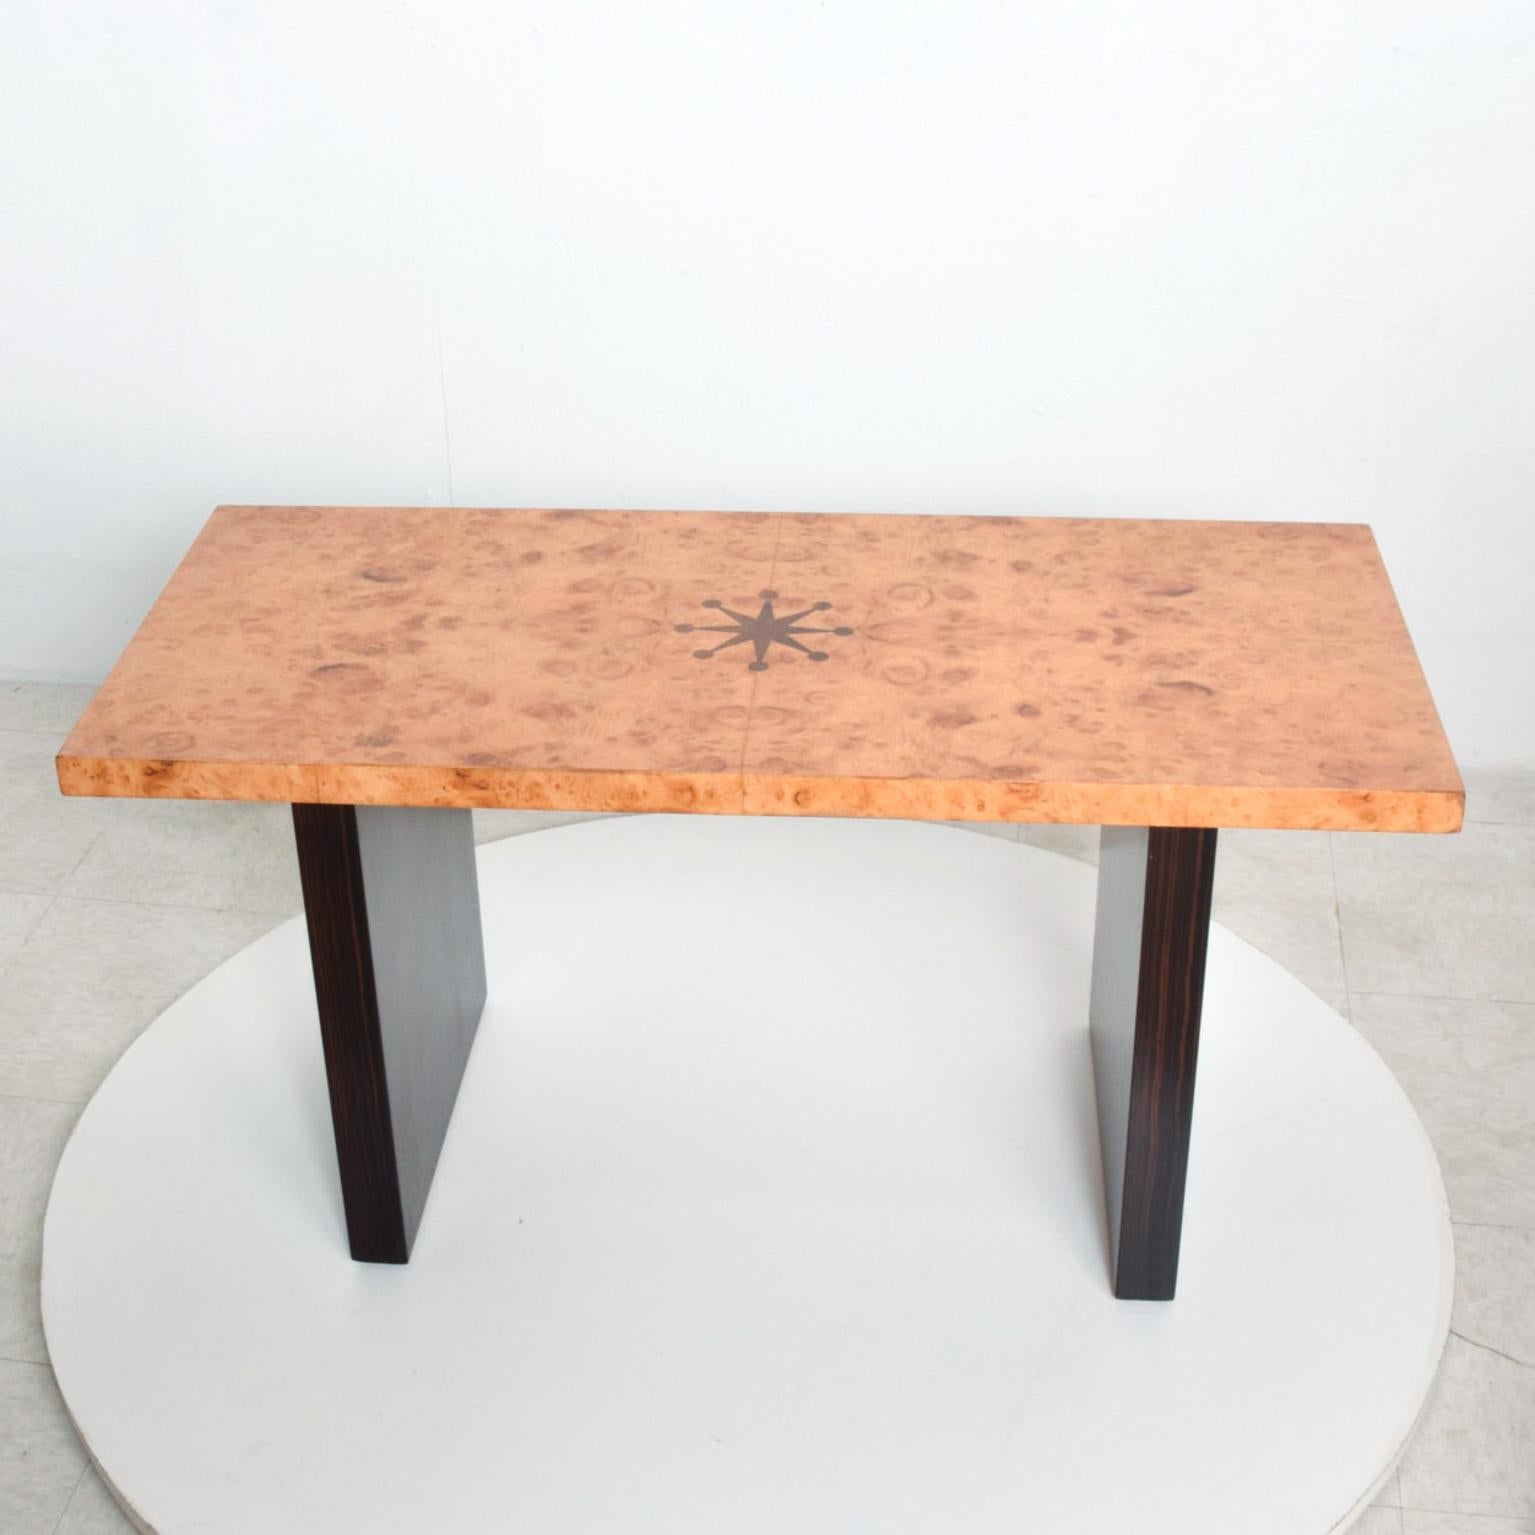  1940s Art Deco Inlaid Bench Coffee Table by Andrew Szoeke 2